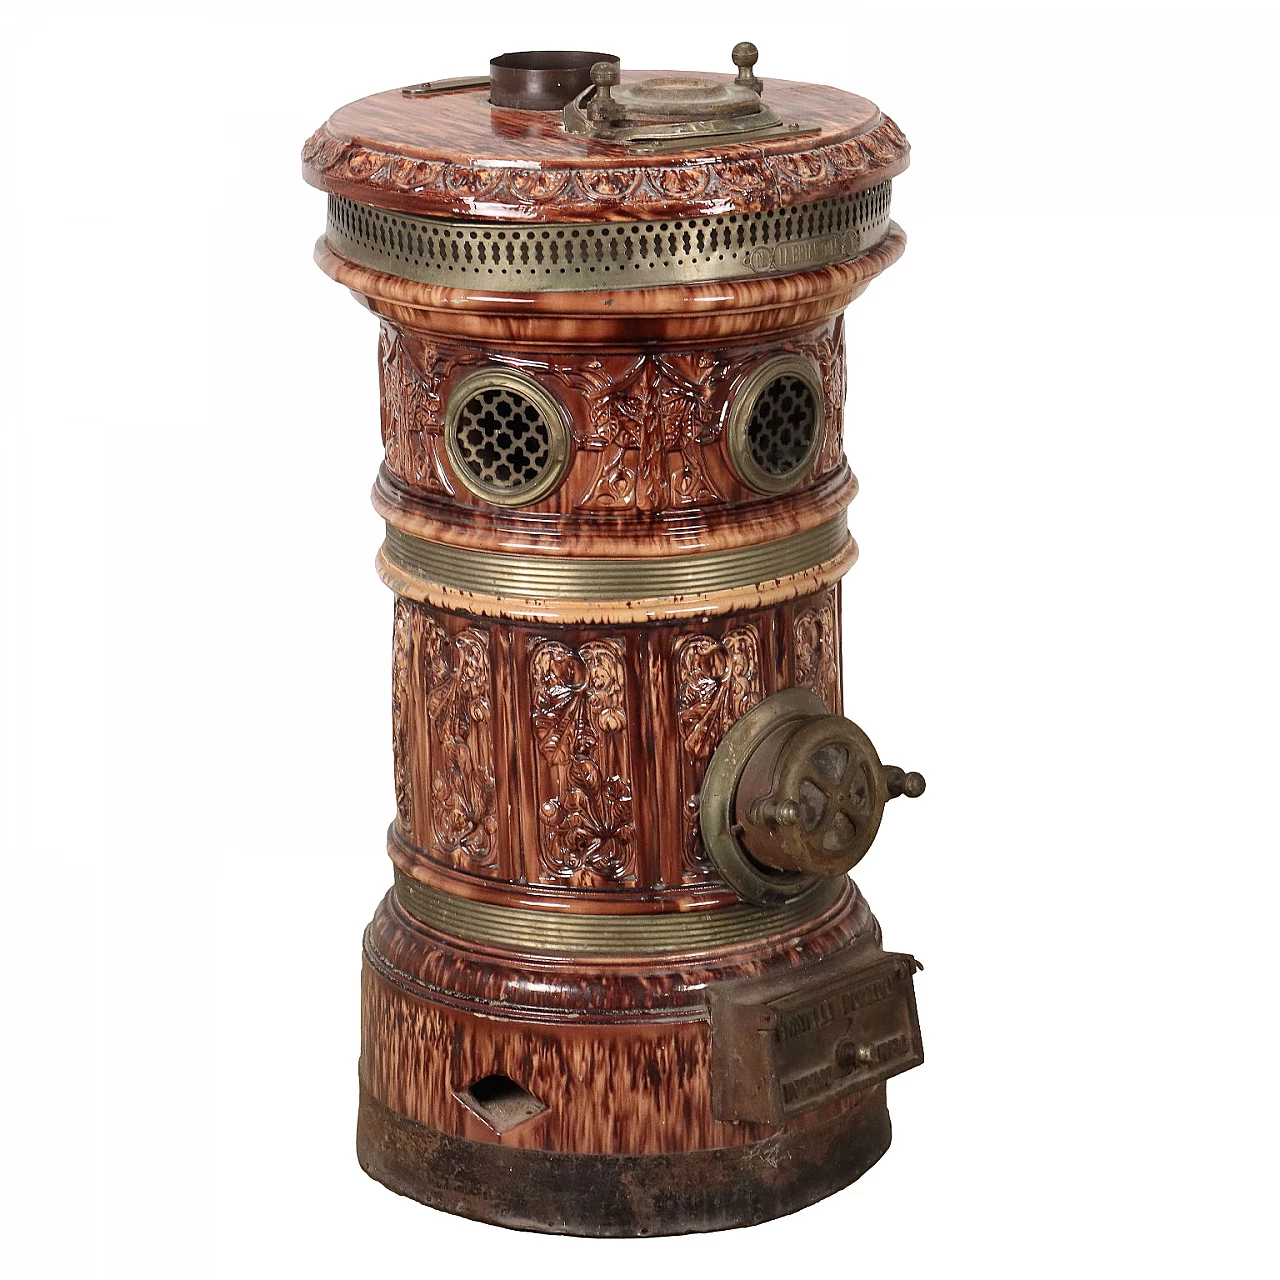 Art Nouveau ceramic and metal stove by Fratelli Pozzoli-Incino Erba, early 20th century 1